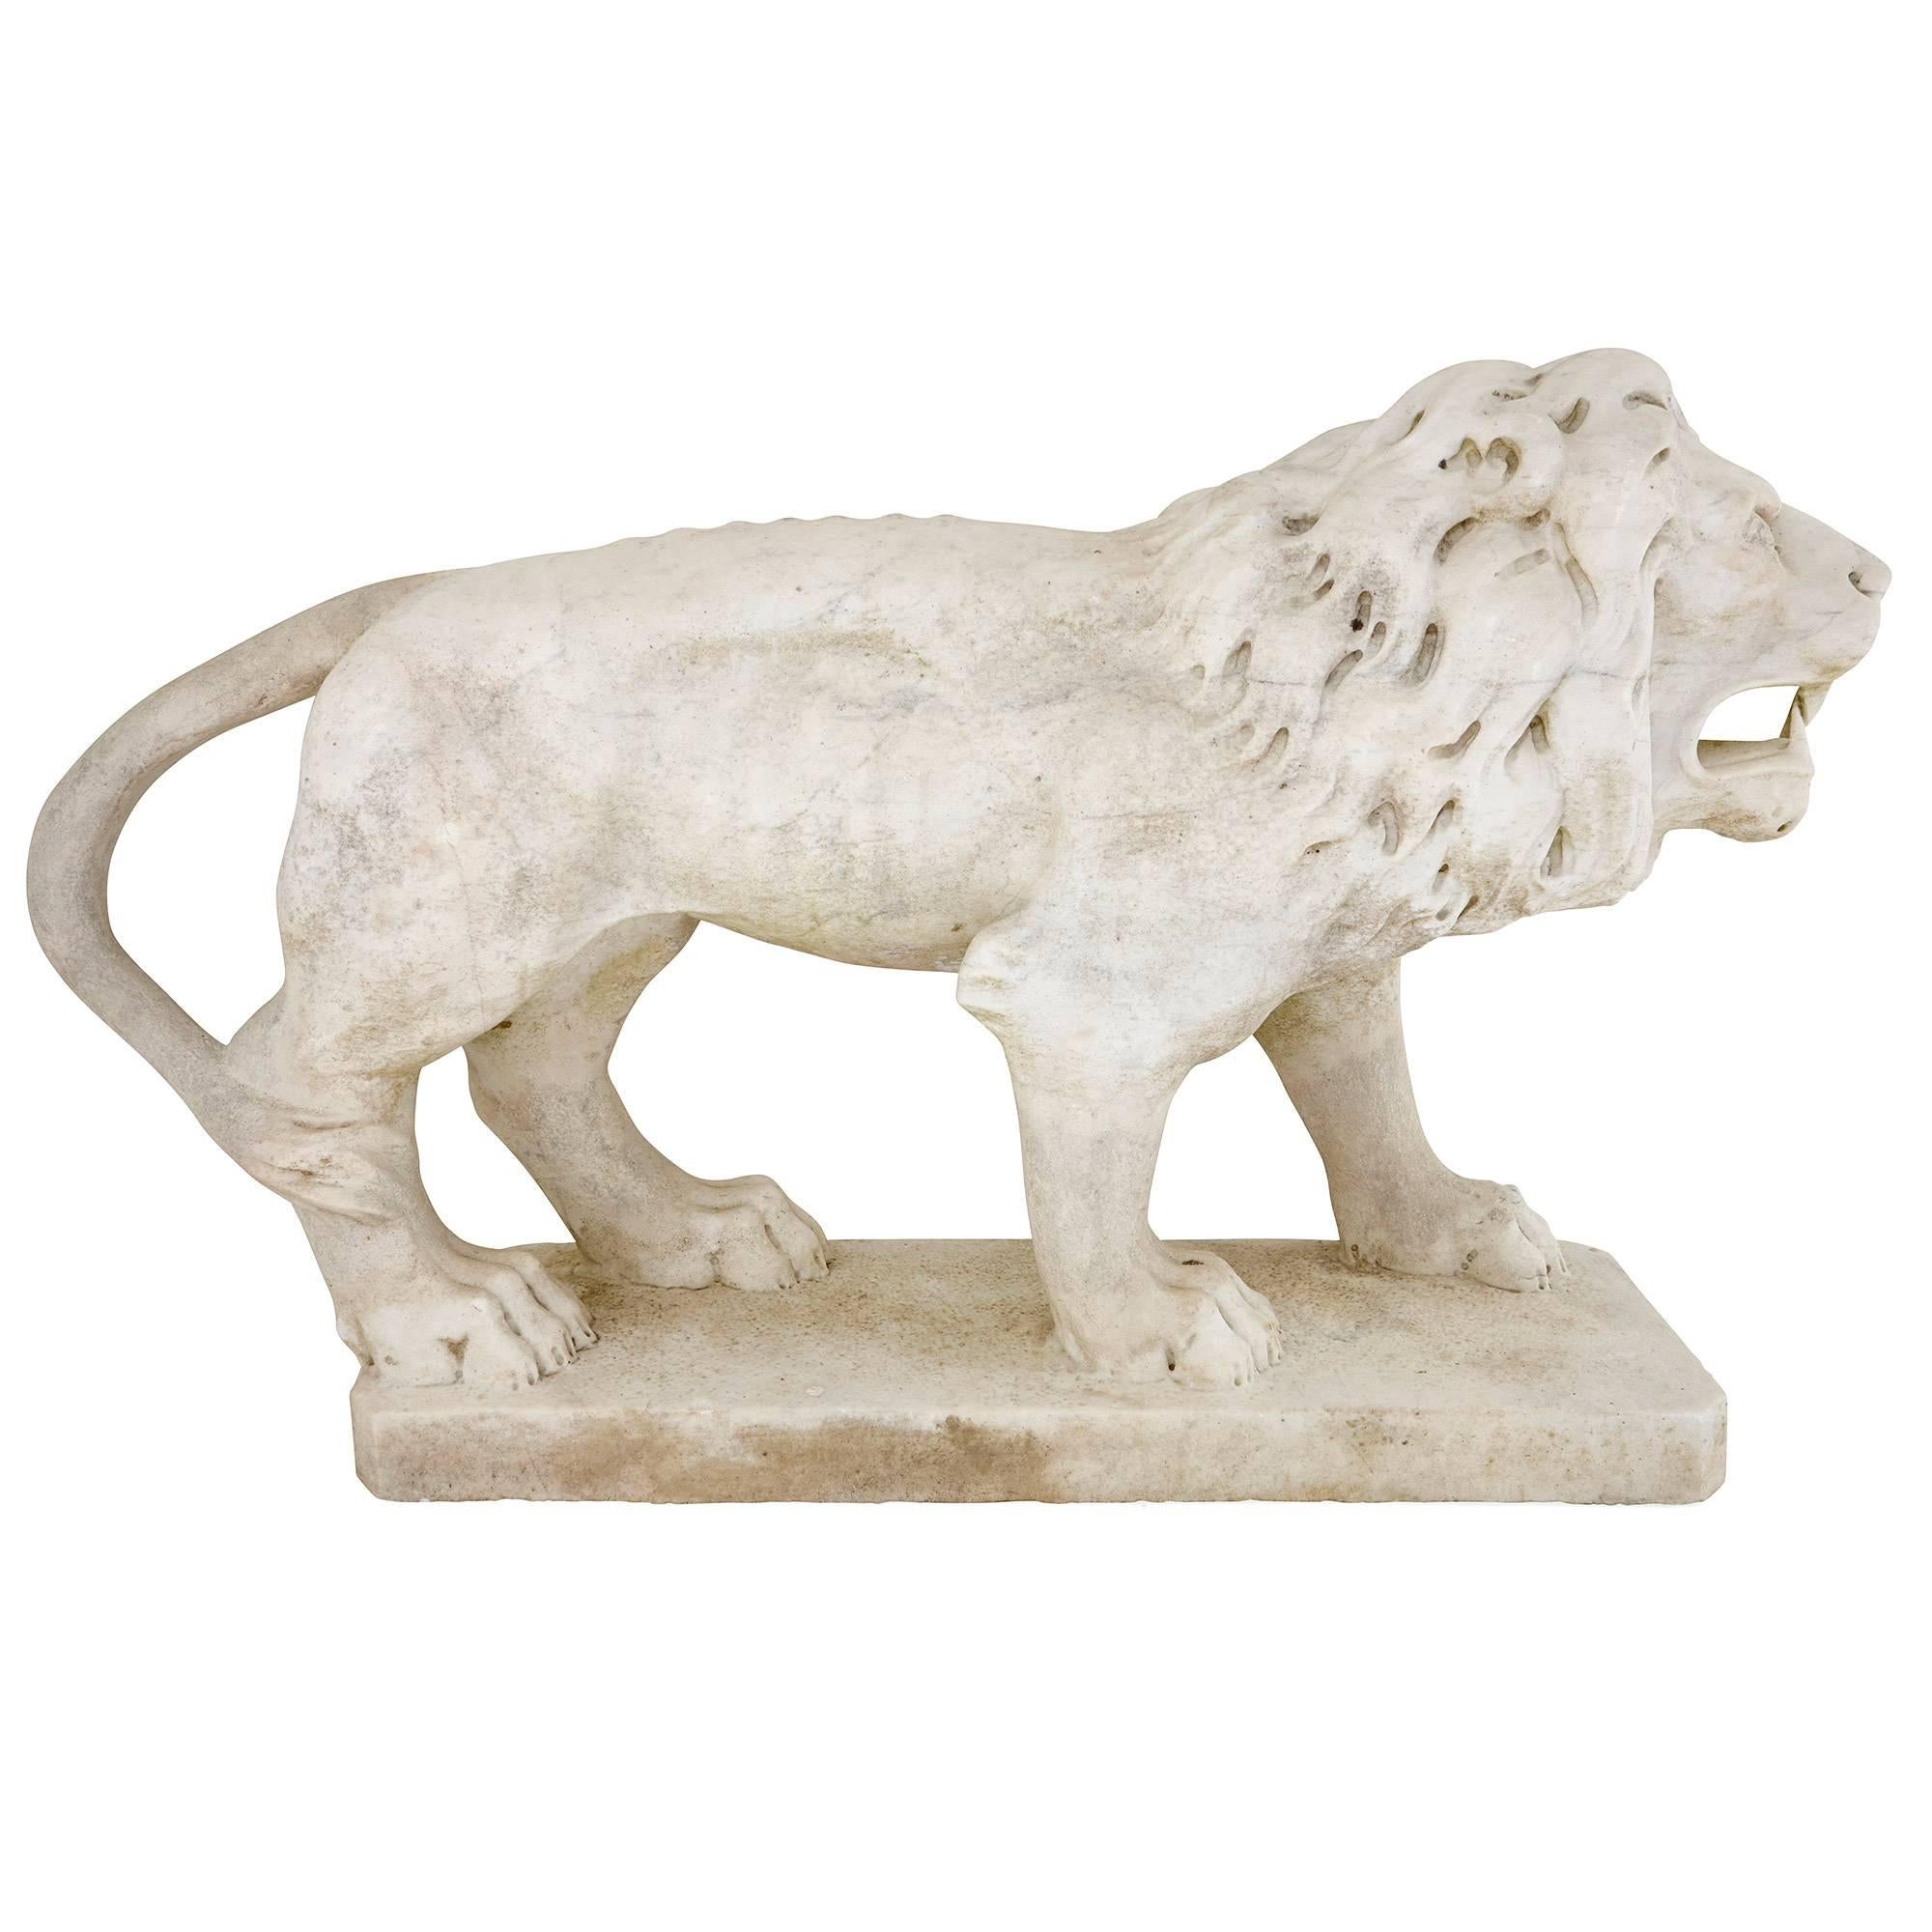 Each of these fine, impressive sculptures depict a male lion in white marble. The lions exhibit impressive manes and bare their teeth as they stand on their clawed paws. Each lion stands on a rectangular marble plinth. 
Sculptures of lions were